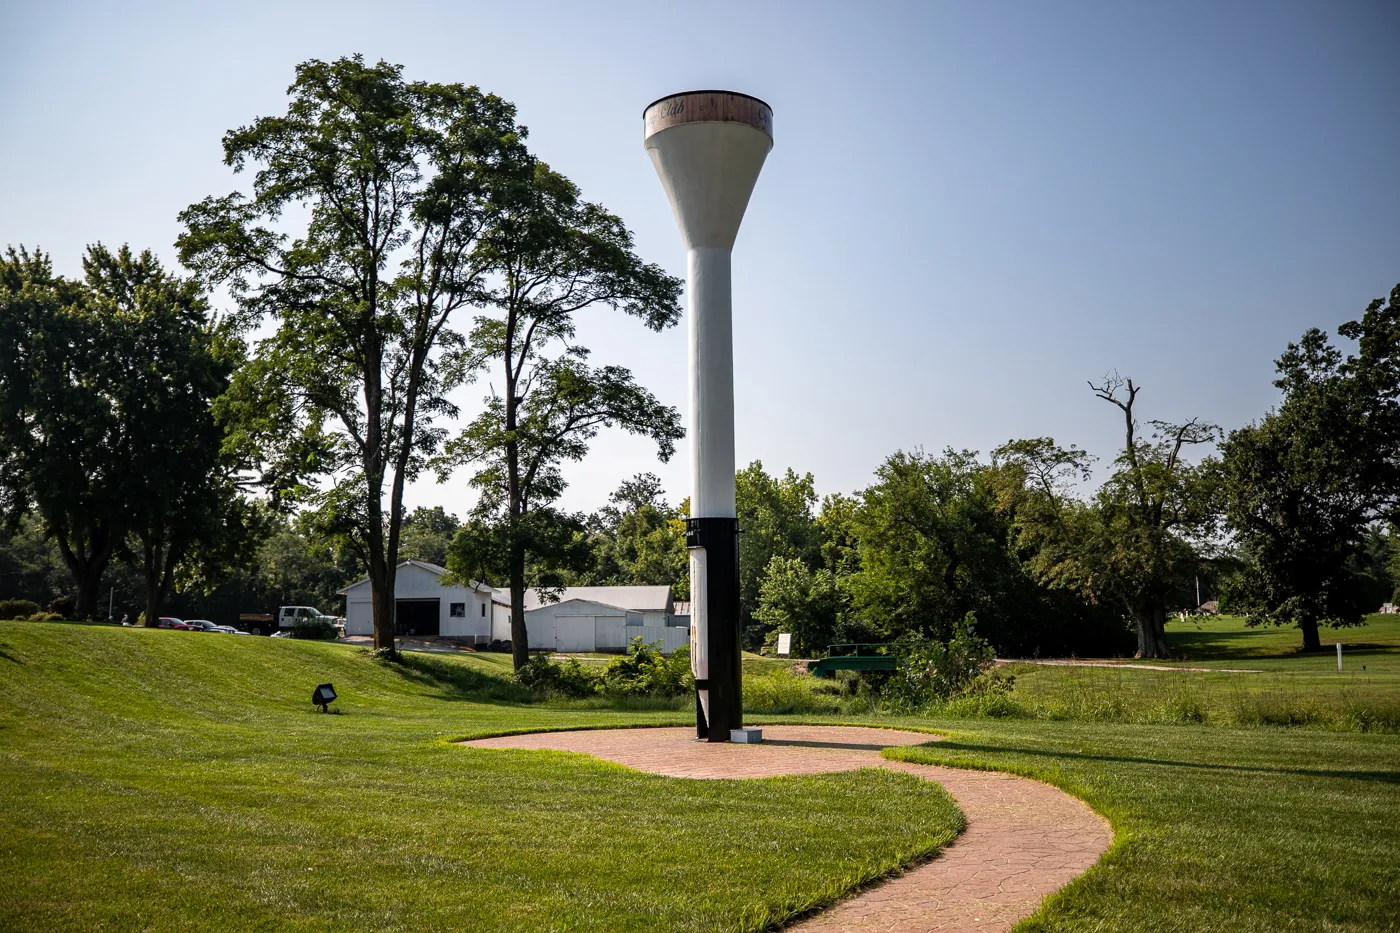 World's Largest Golf Tee in Casey, Illinois roadside attraction